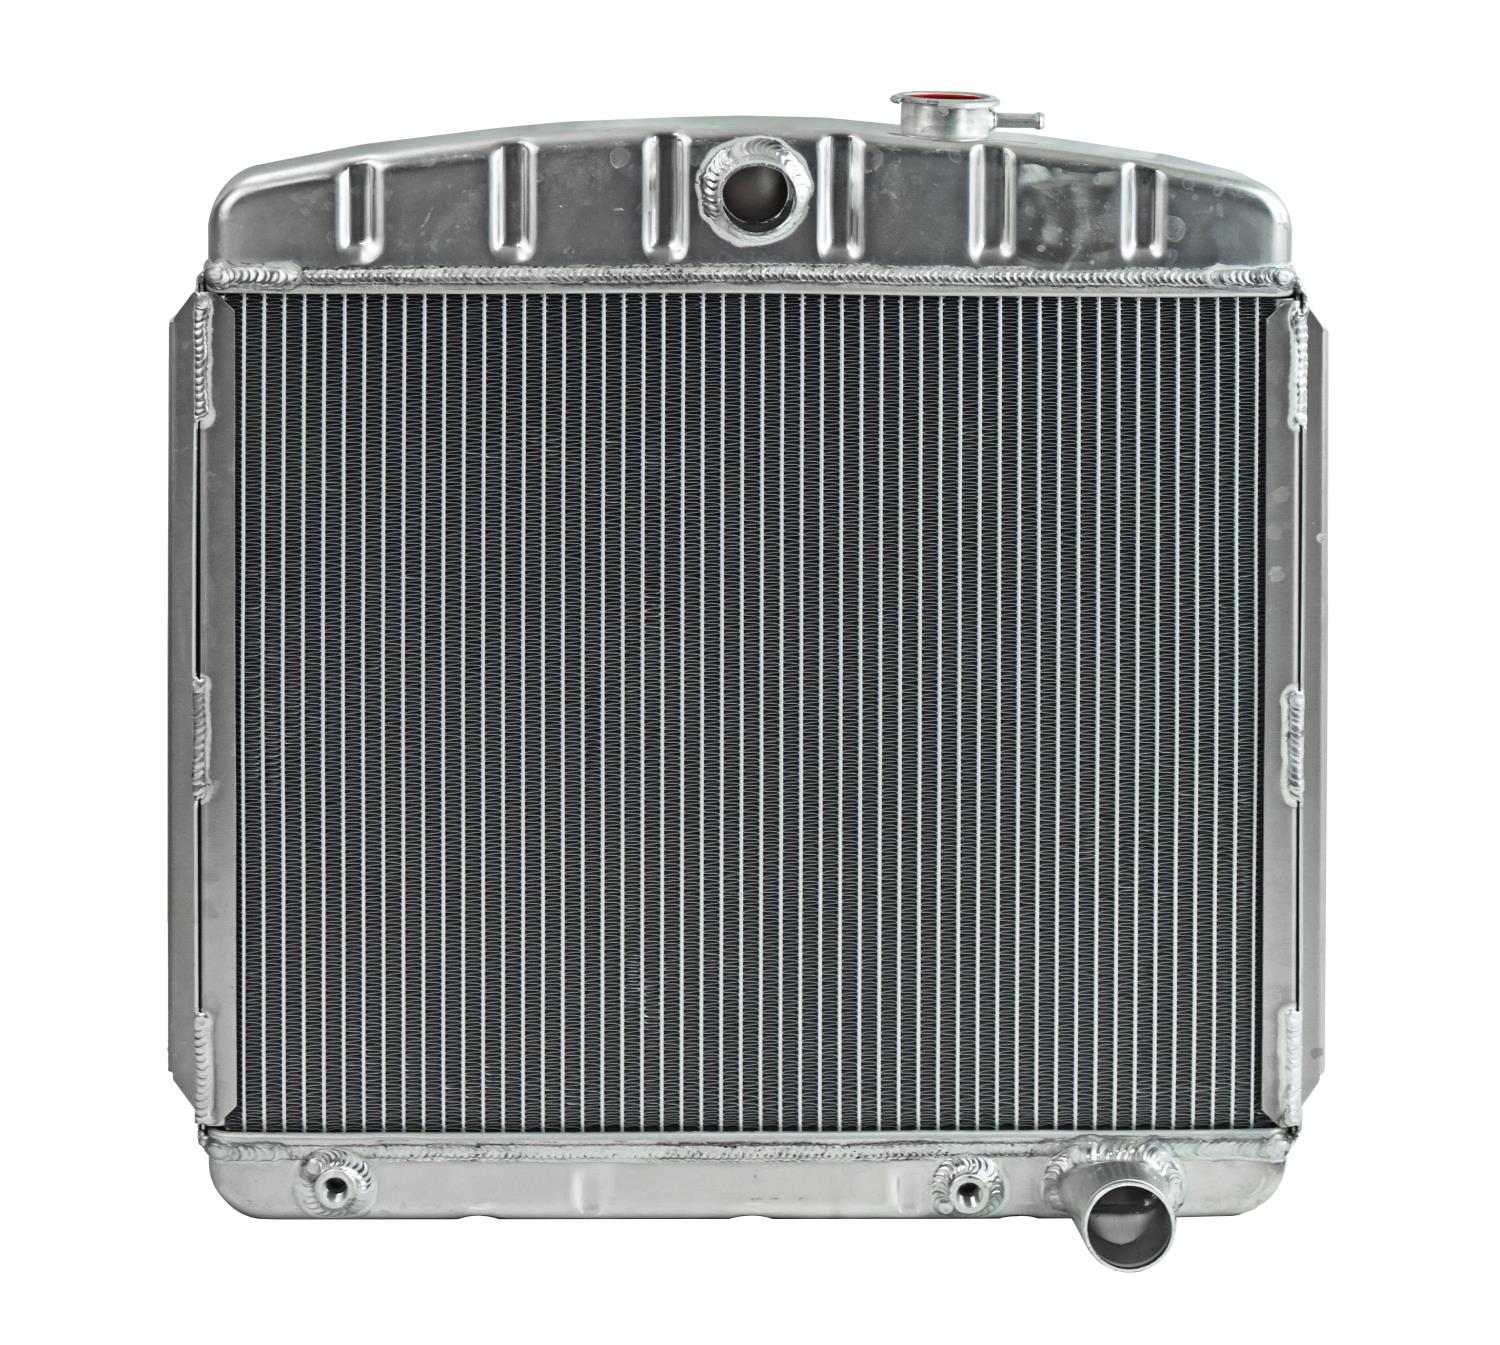 Reproduction Aluminum Radiator for 1955-1957 Chevrolet with V8